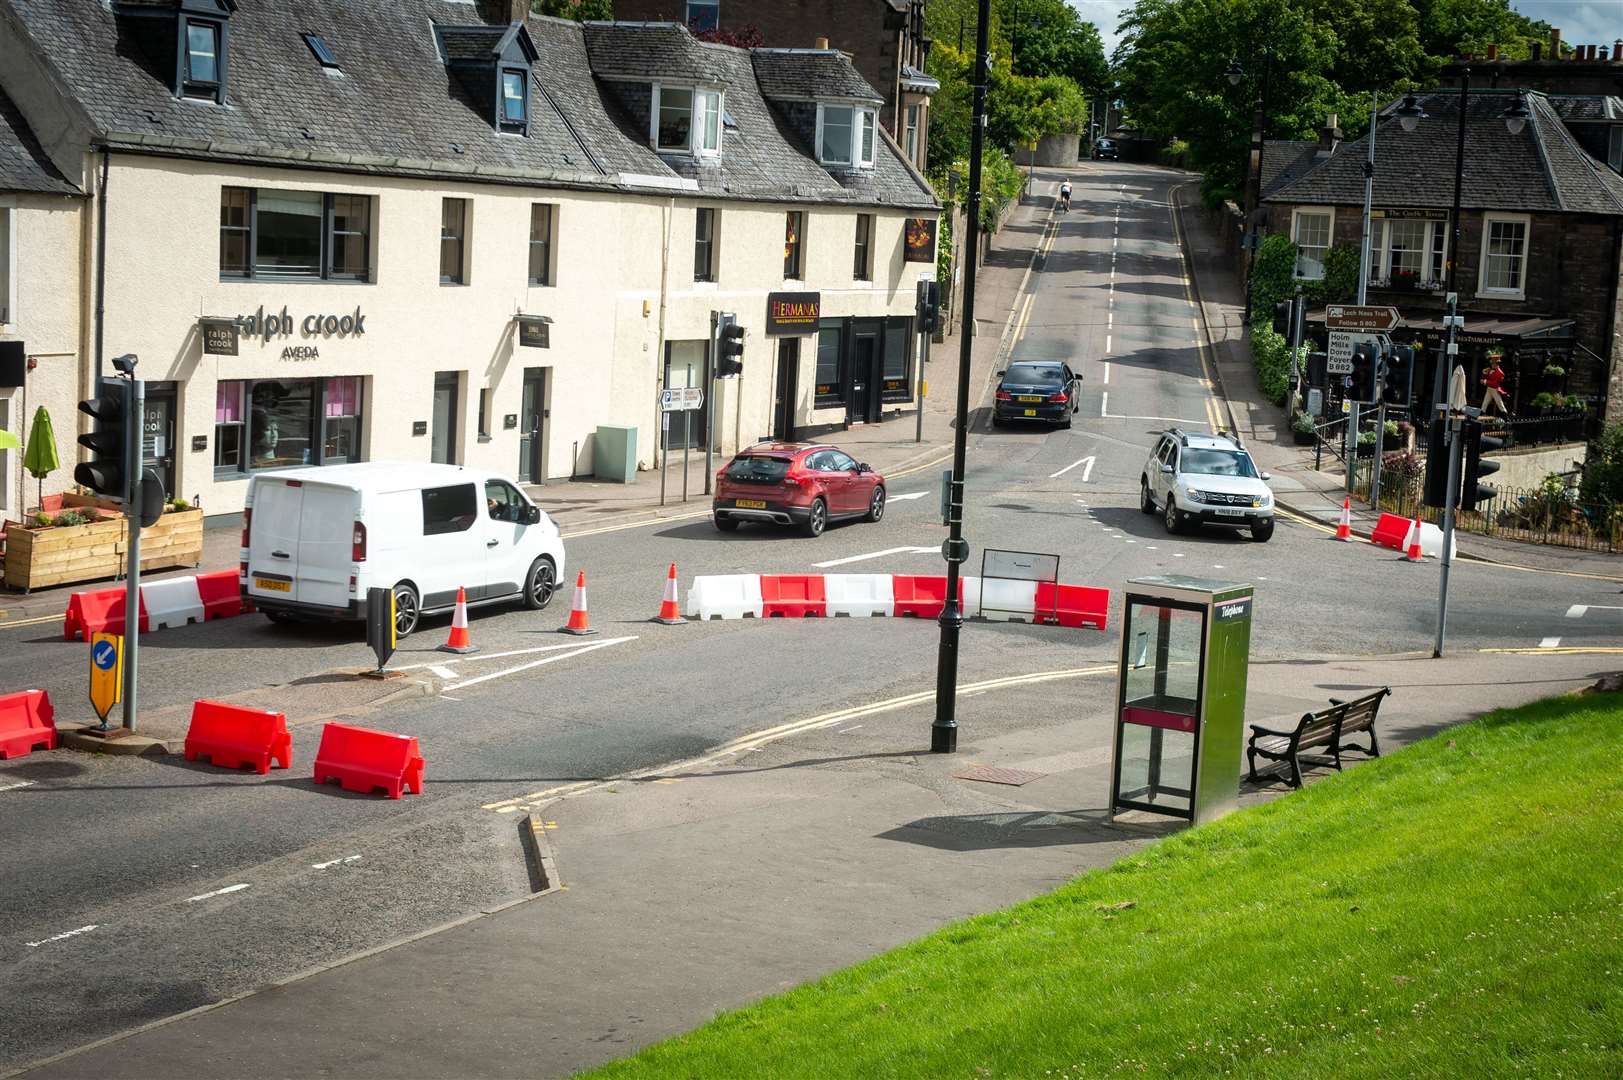 There have been complaints about the one-way system implemented around Inverness Castle.